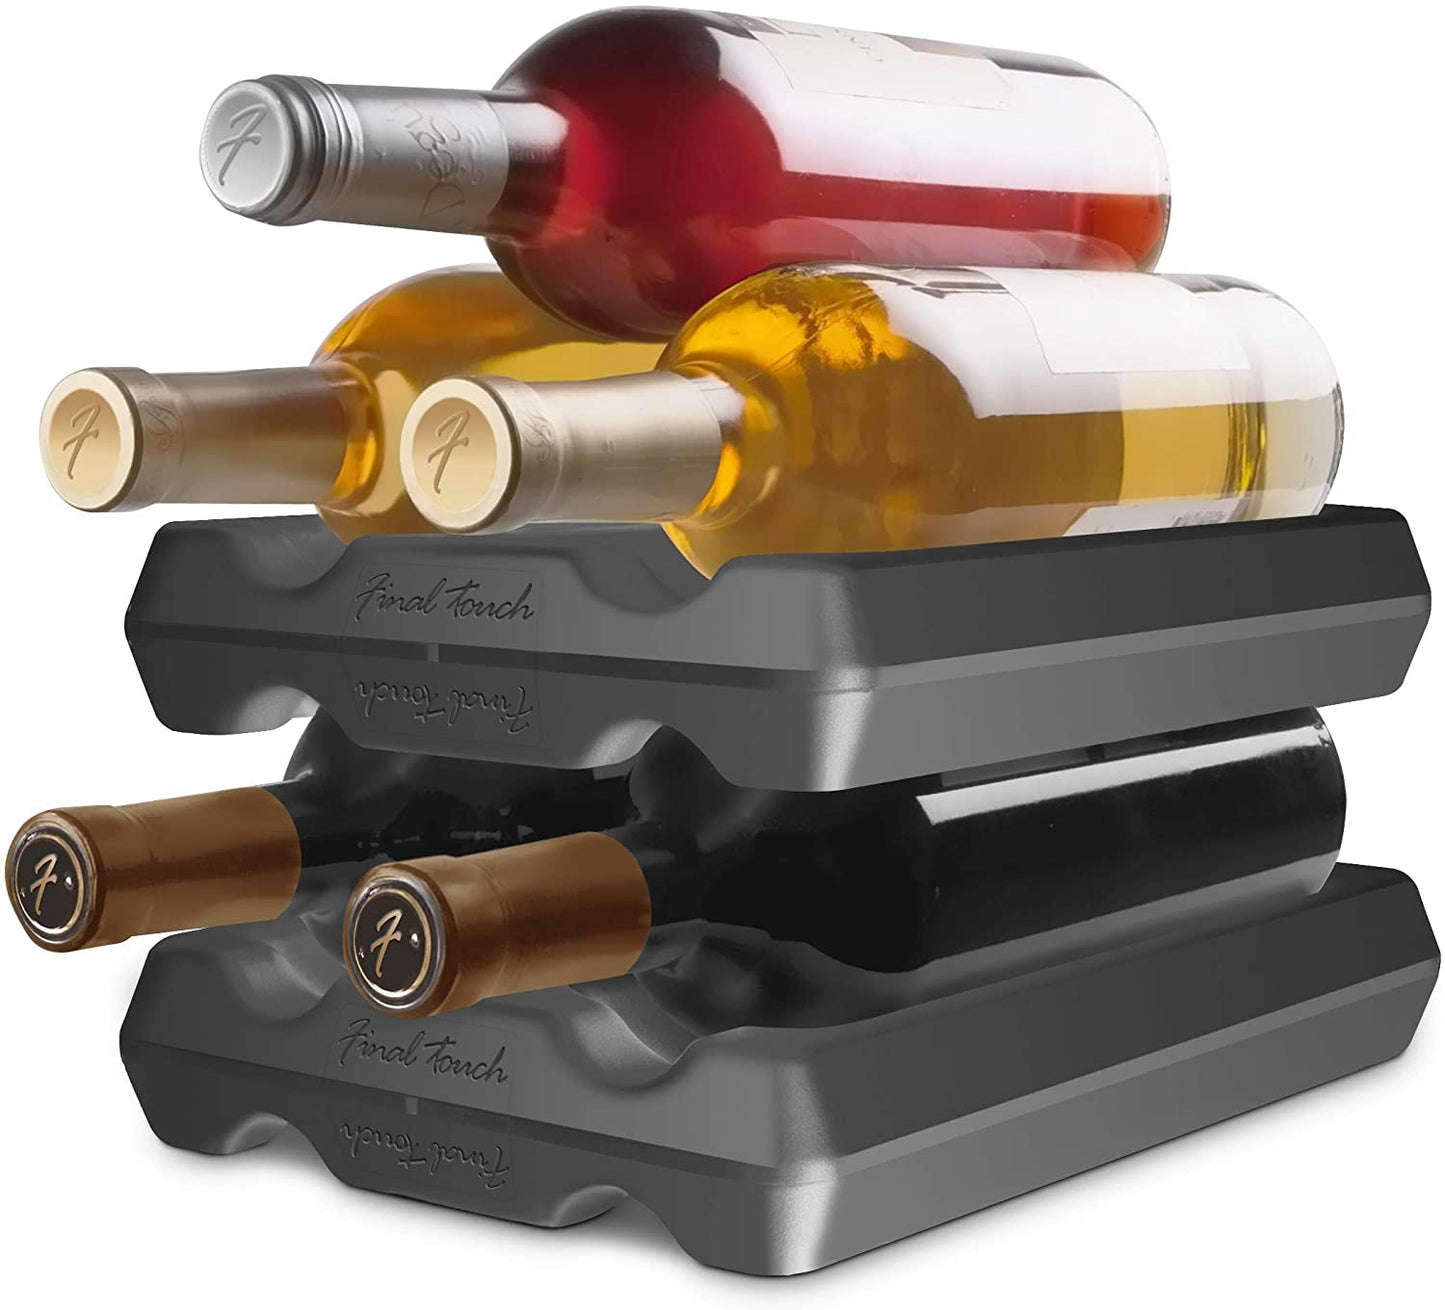 two wine bottle stackers illustrated stacked with multiple wine bottles on a white background